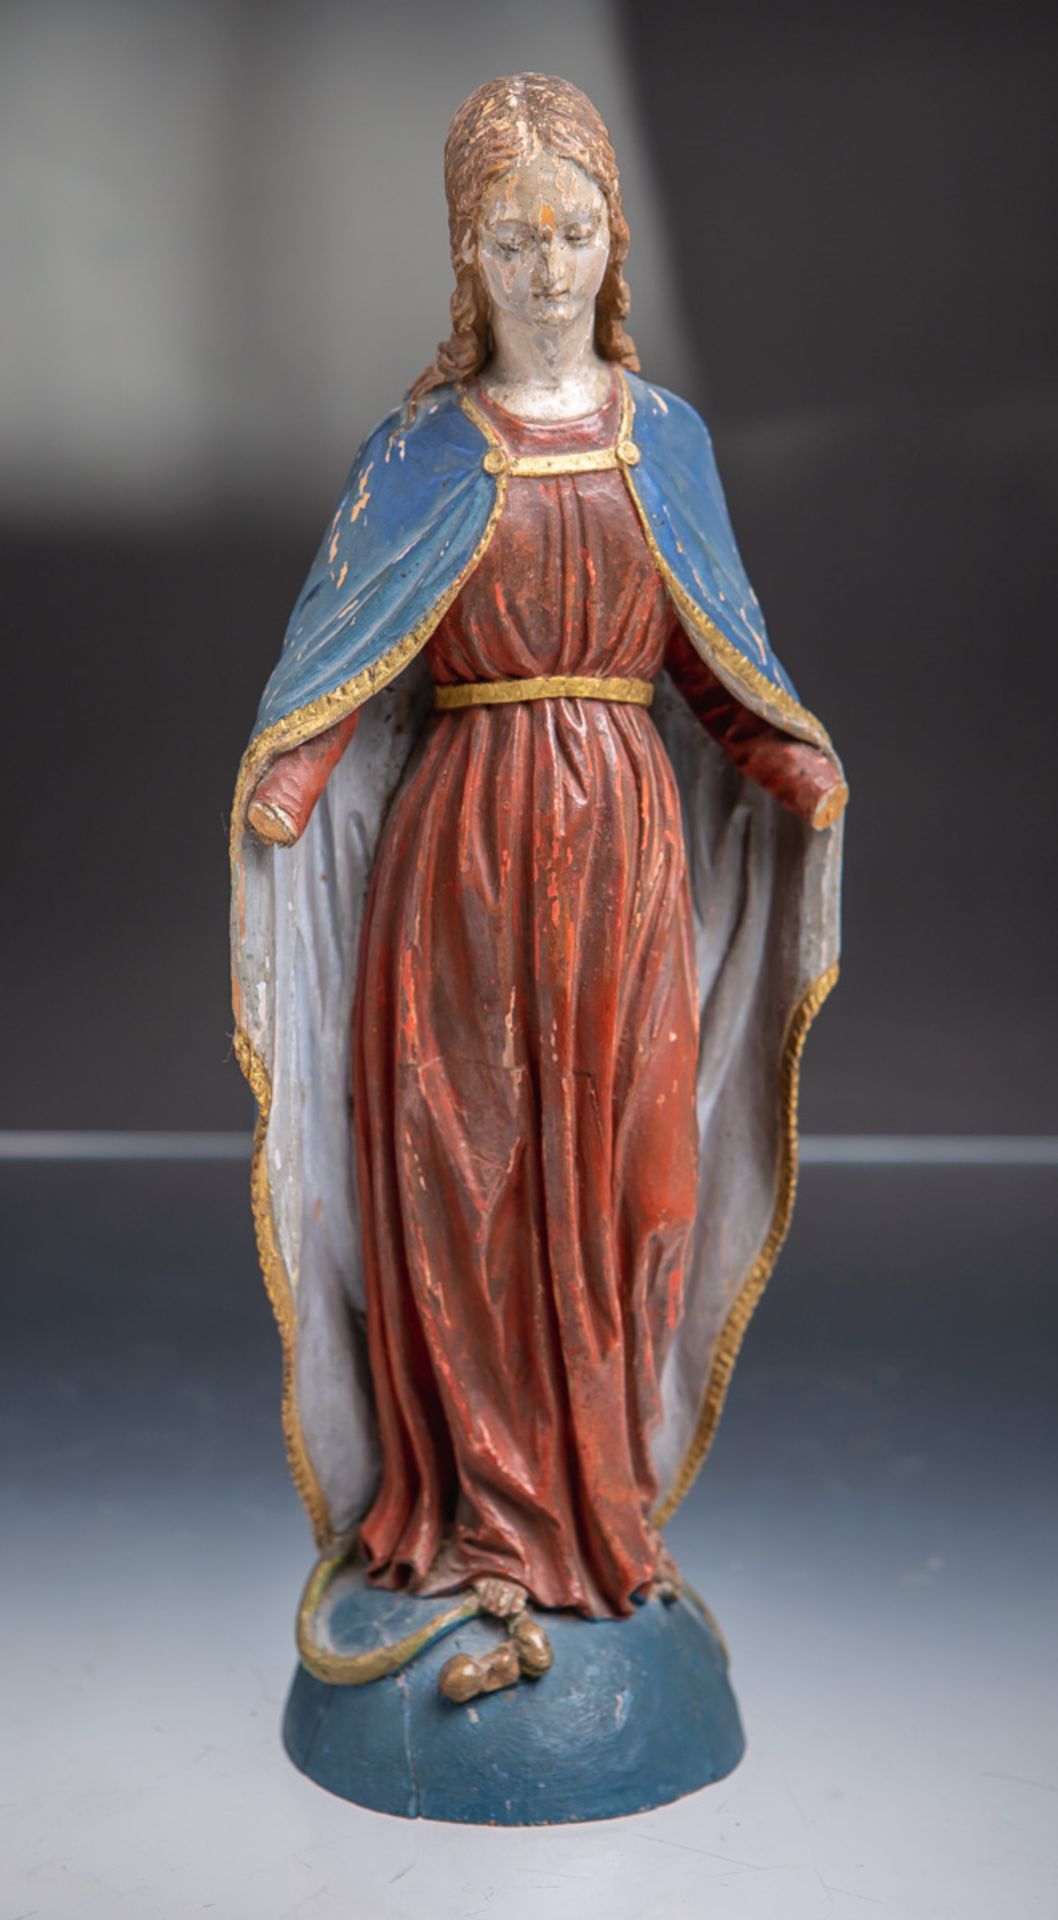 Marienfigur "Immaculata Conceptio" (wohl 19. Jh.)